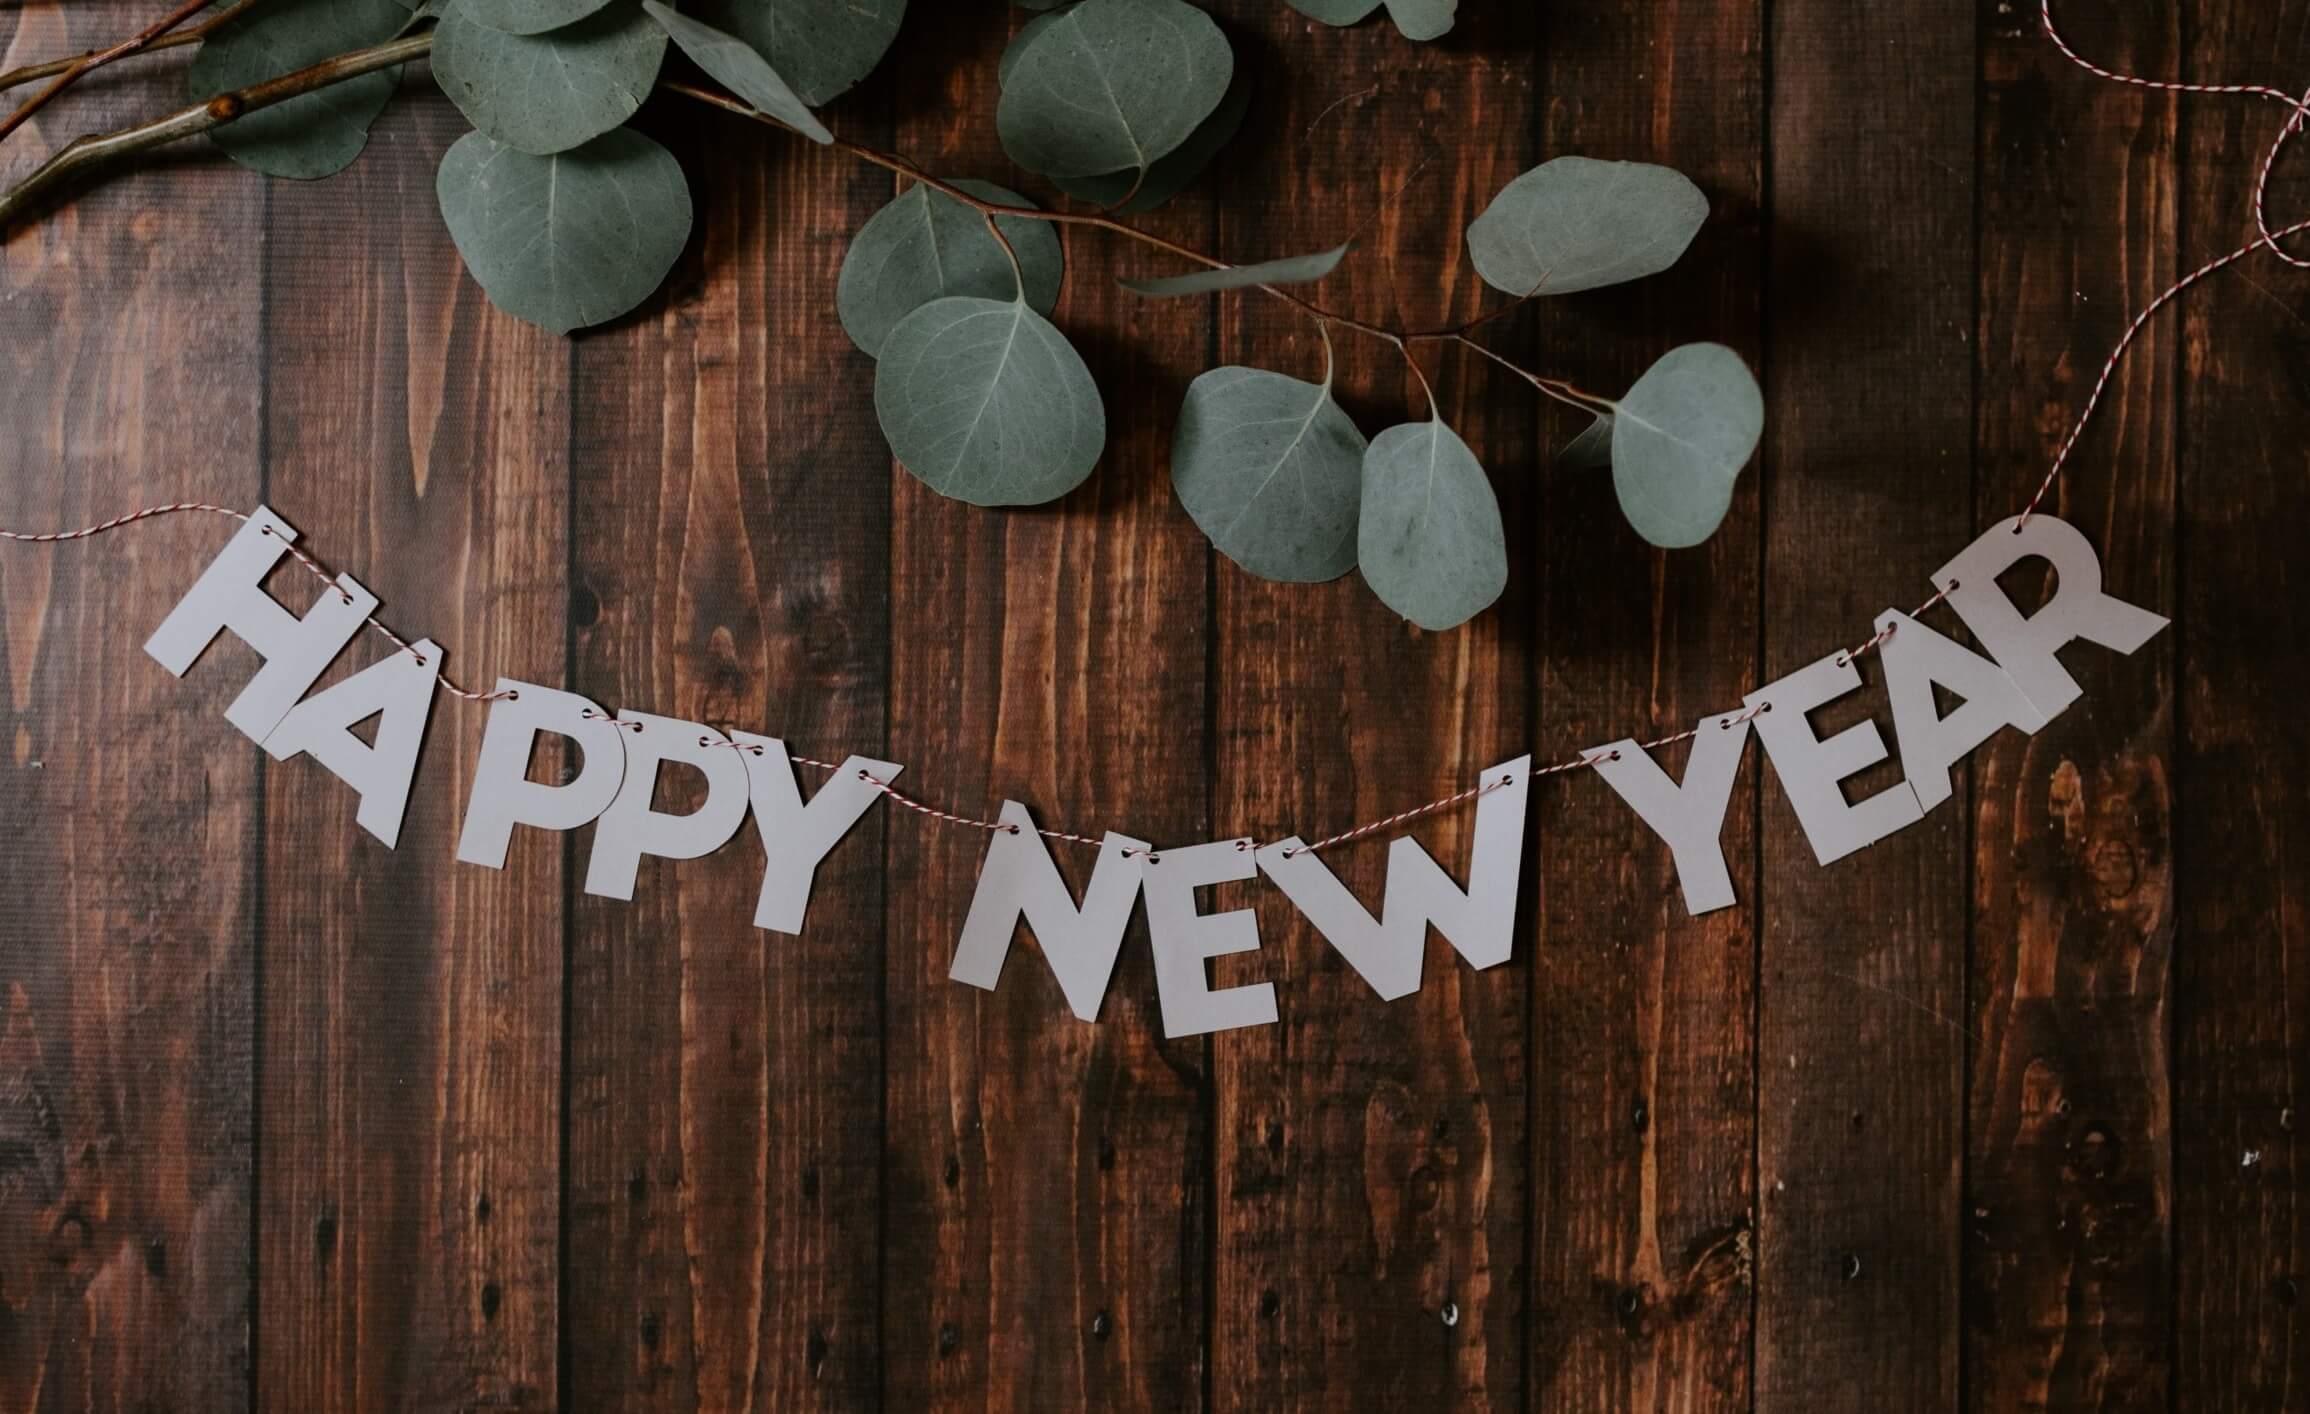 wood background with banner that says HAPPY NEW YEAR accented by some leaves